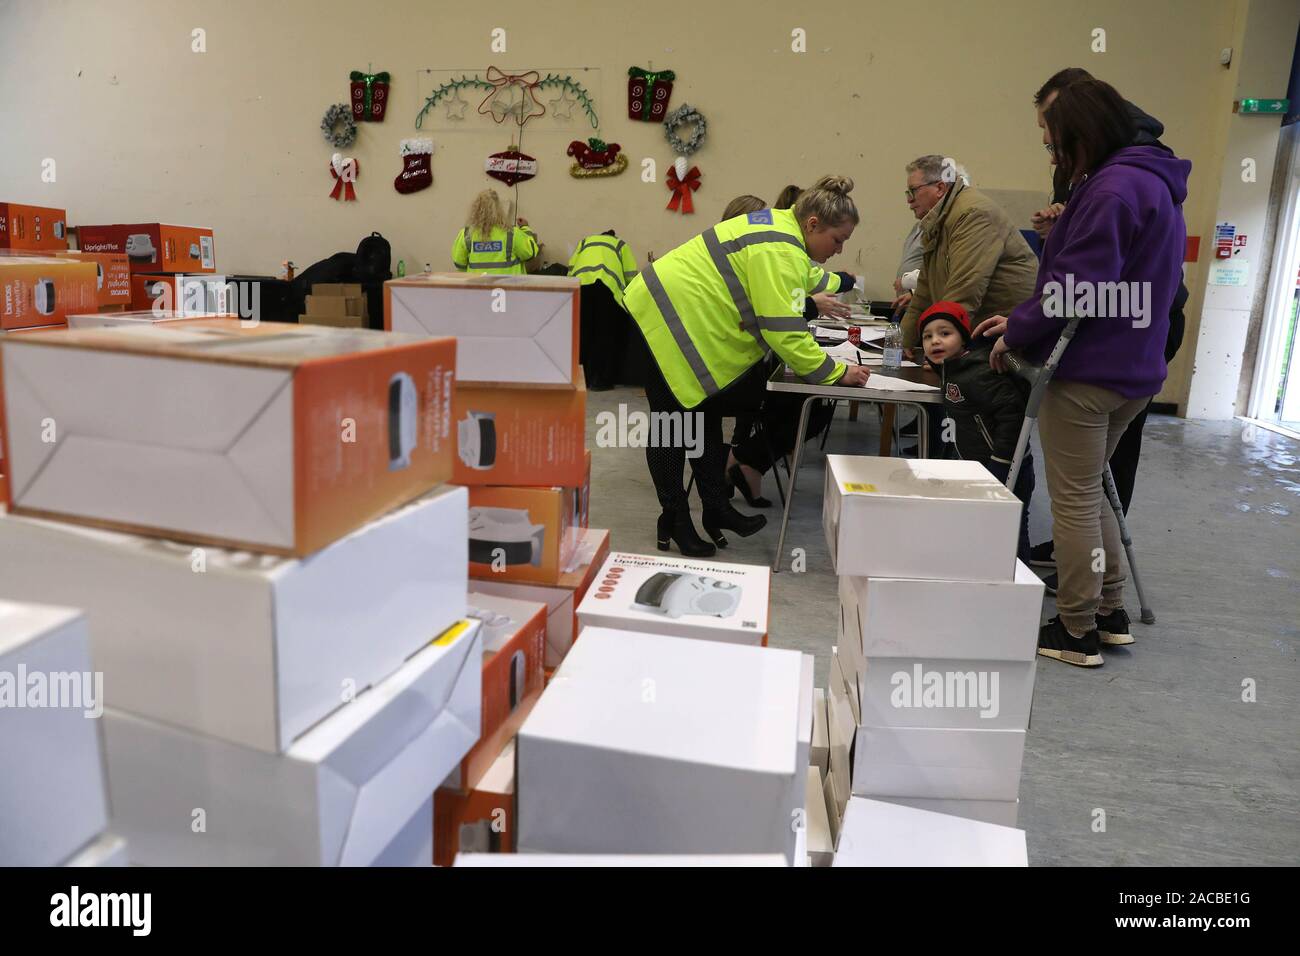 People collect heaters from Camelon community centre in Falkirk after homes in the area had a gas mains failure. Stock Photo